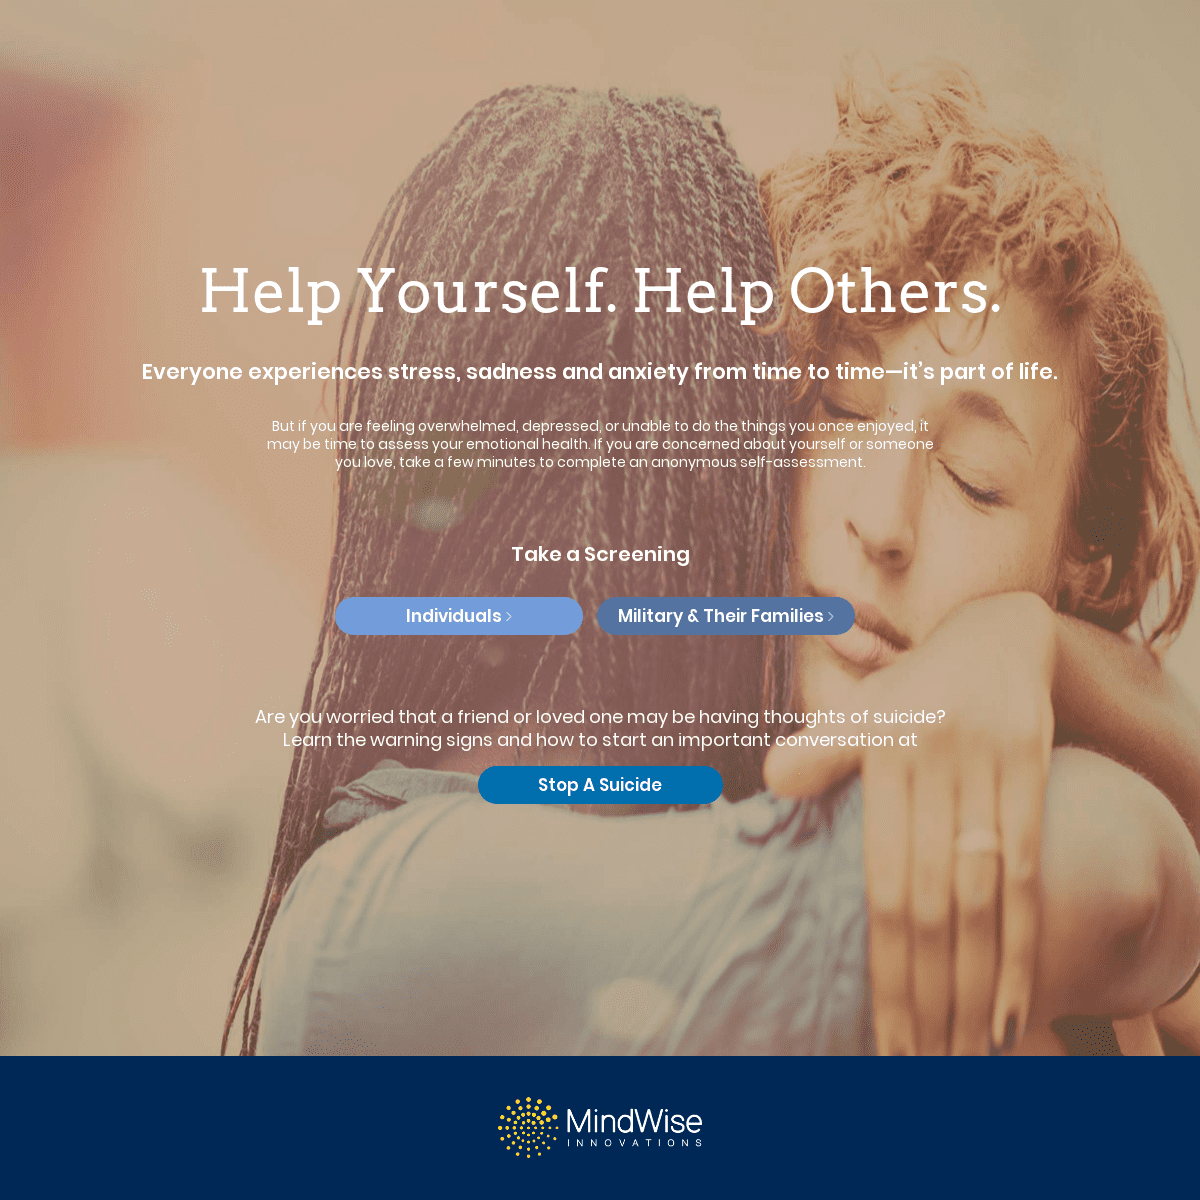 Help Yourself. Help Others.